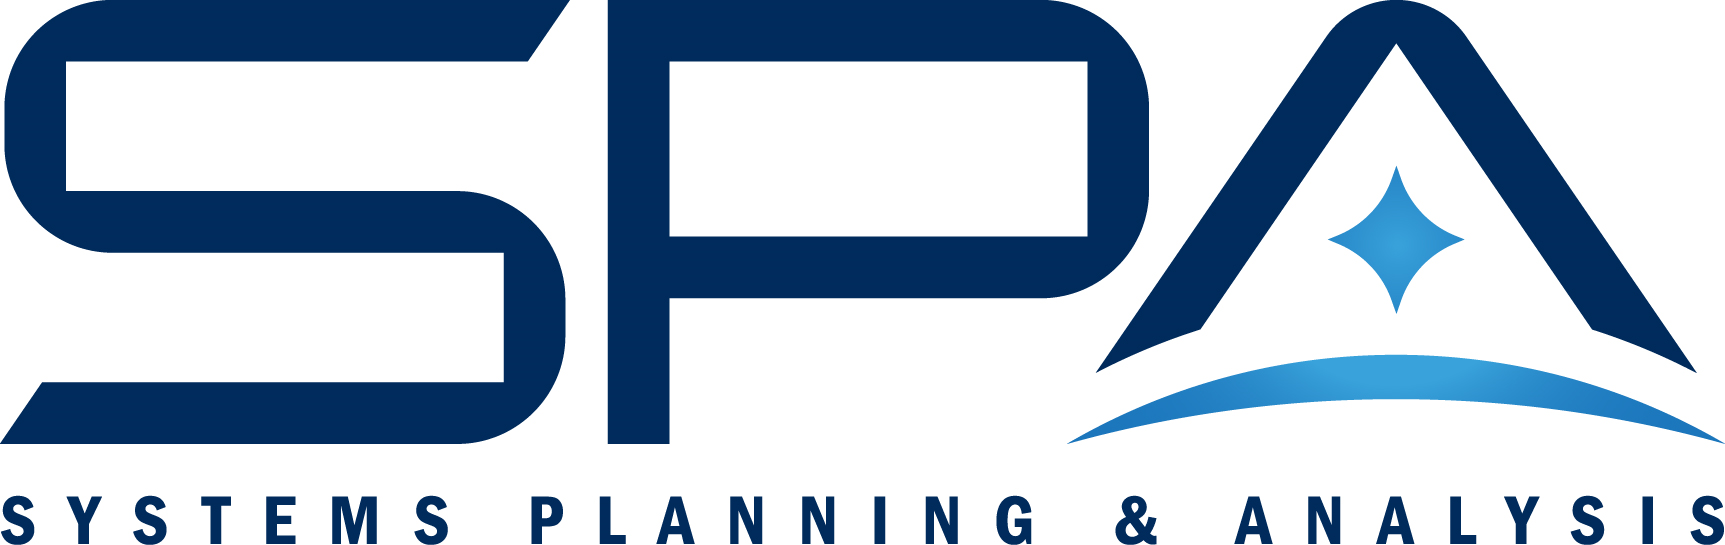 Systems Planning and Analysis, Inc. logo